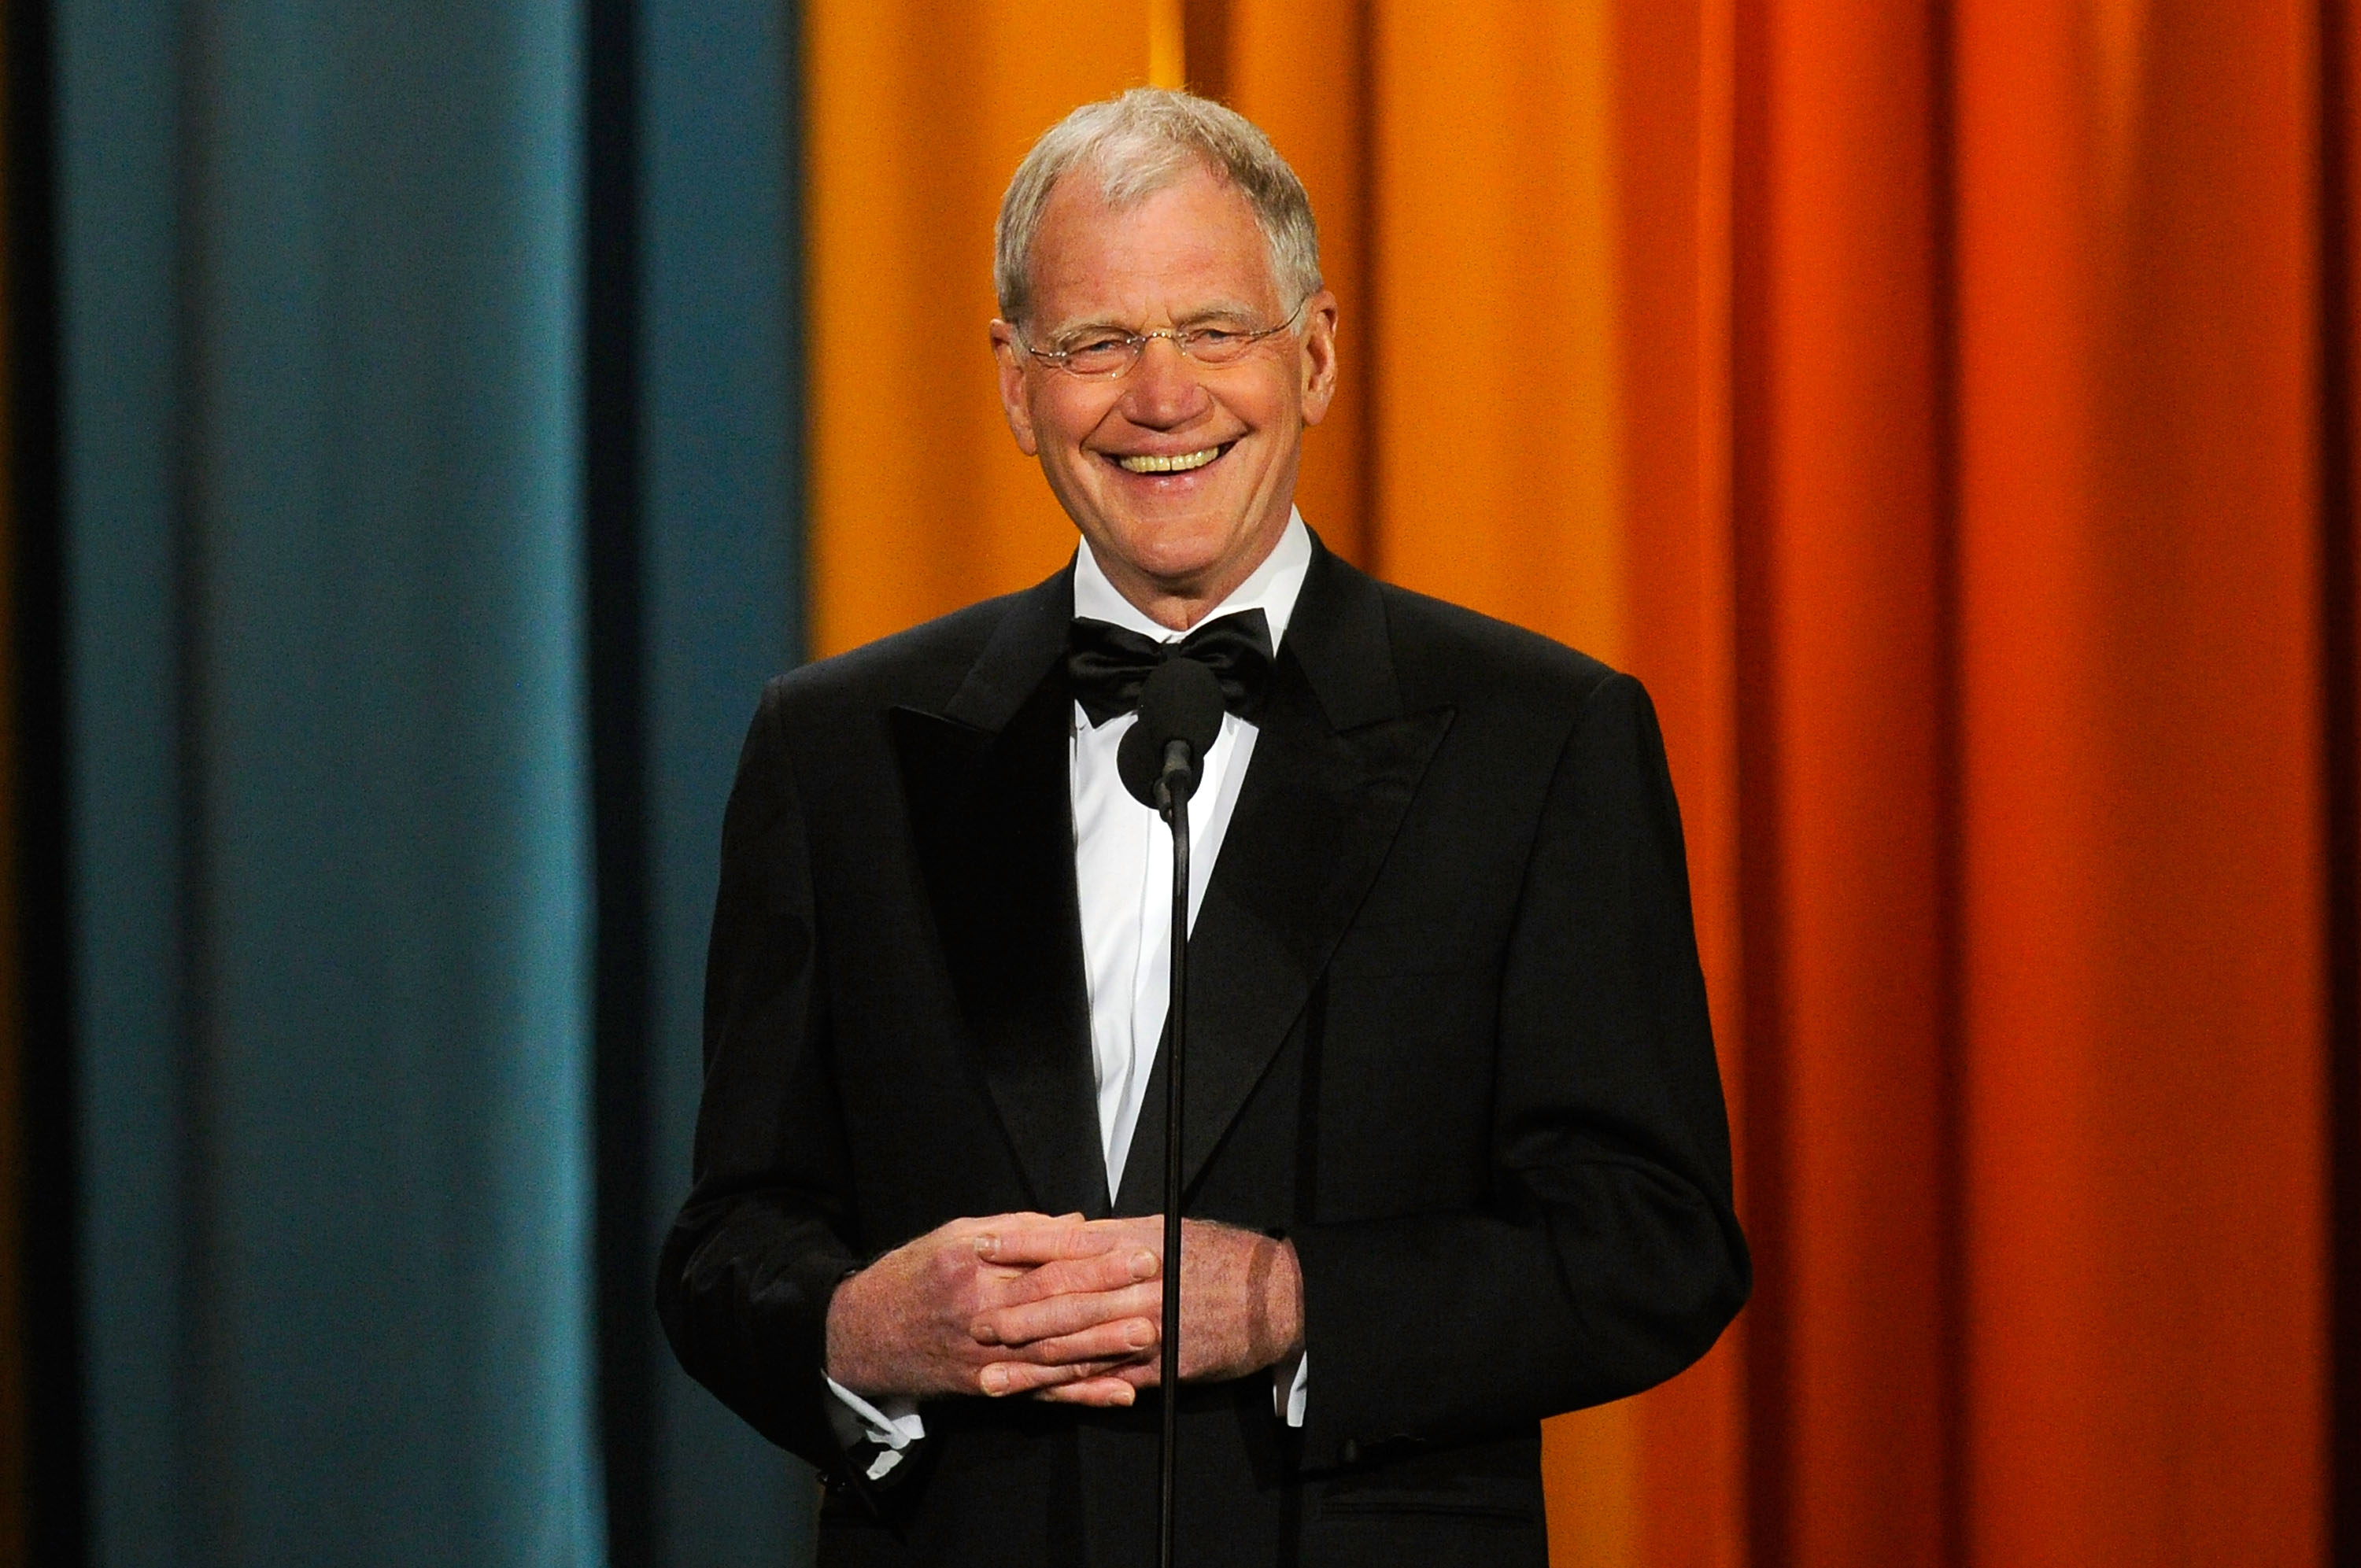 7 Facts About David Letterman You May Not Have Known From His Record Label To His Secret Acting Career